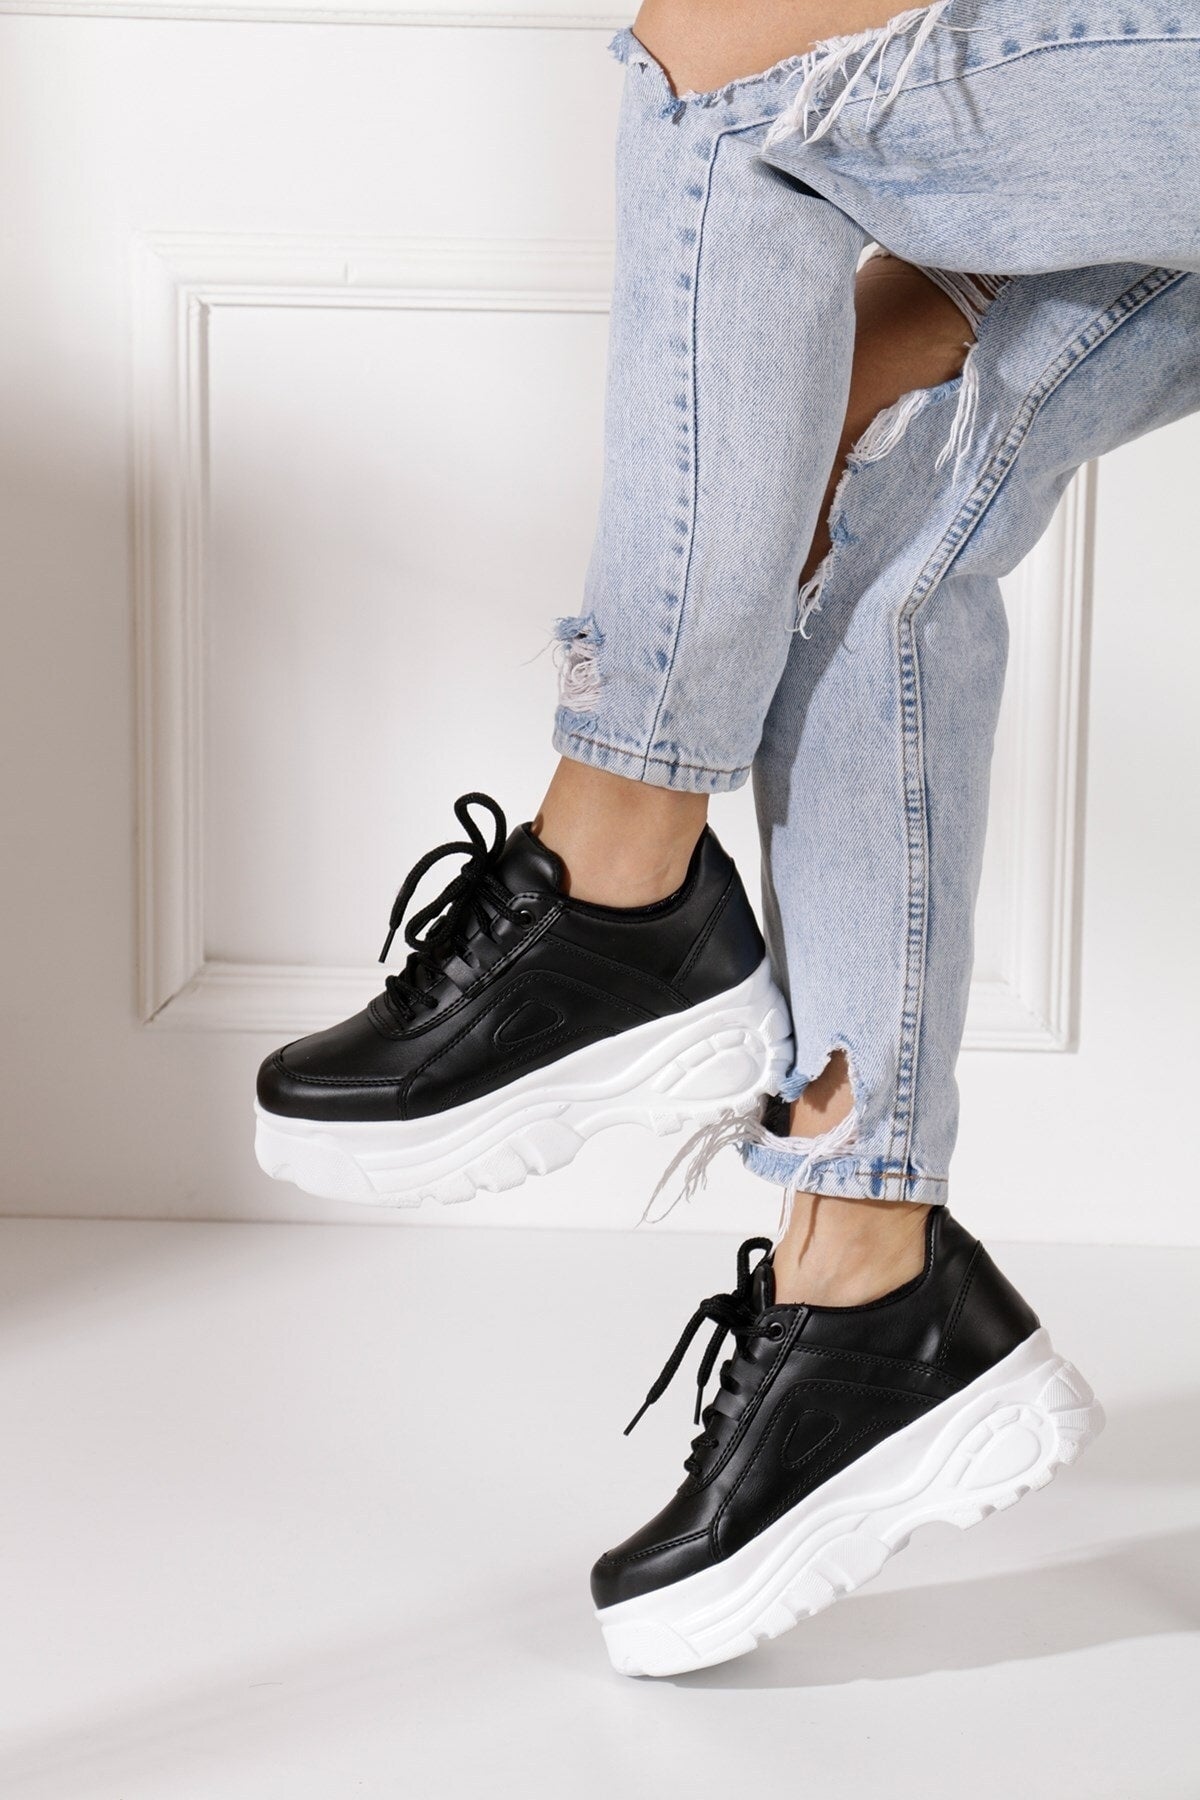 Casual Women's Black White Sneakers High Sole 6 Cm Comfortable Lightweight Sneaker 001